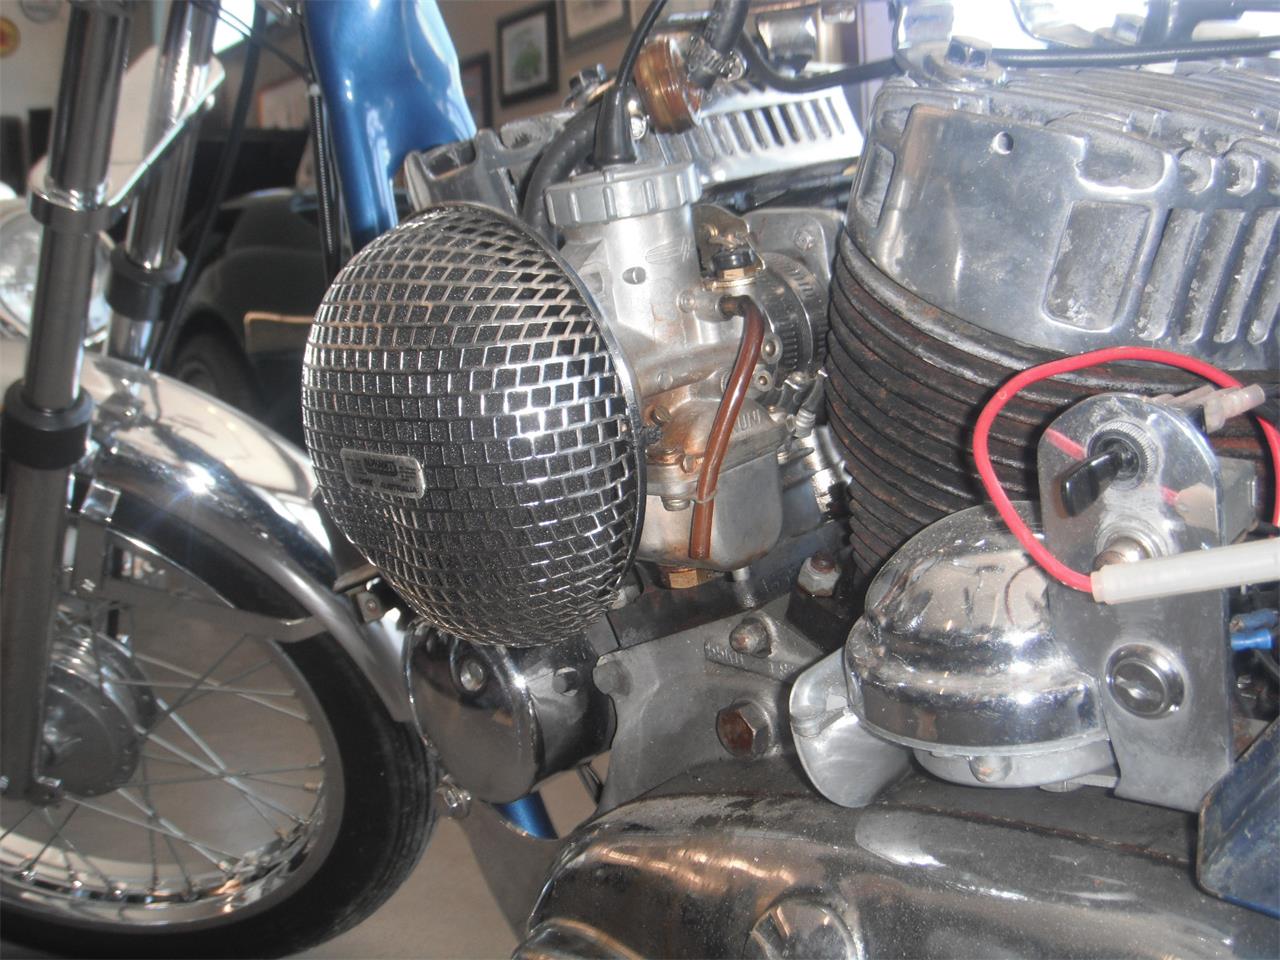 1955 Harley-Davidson Motorcycle for sale in Carnation, WA – photo 19